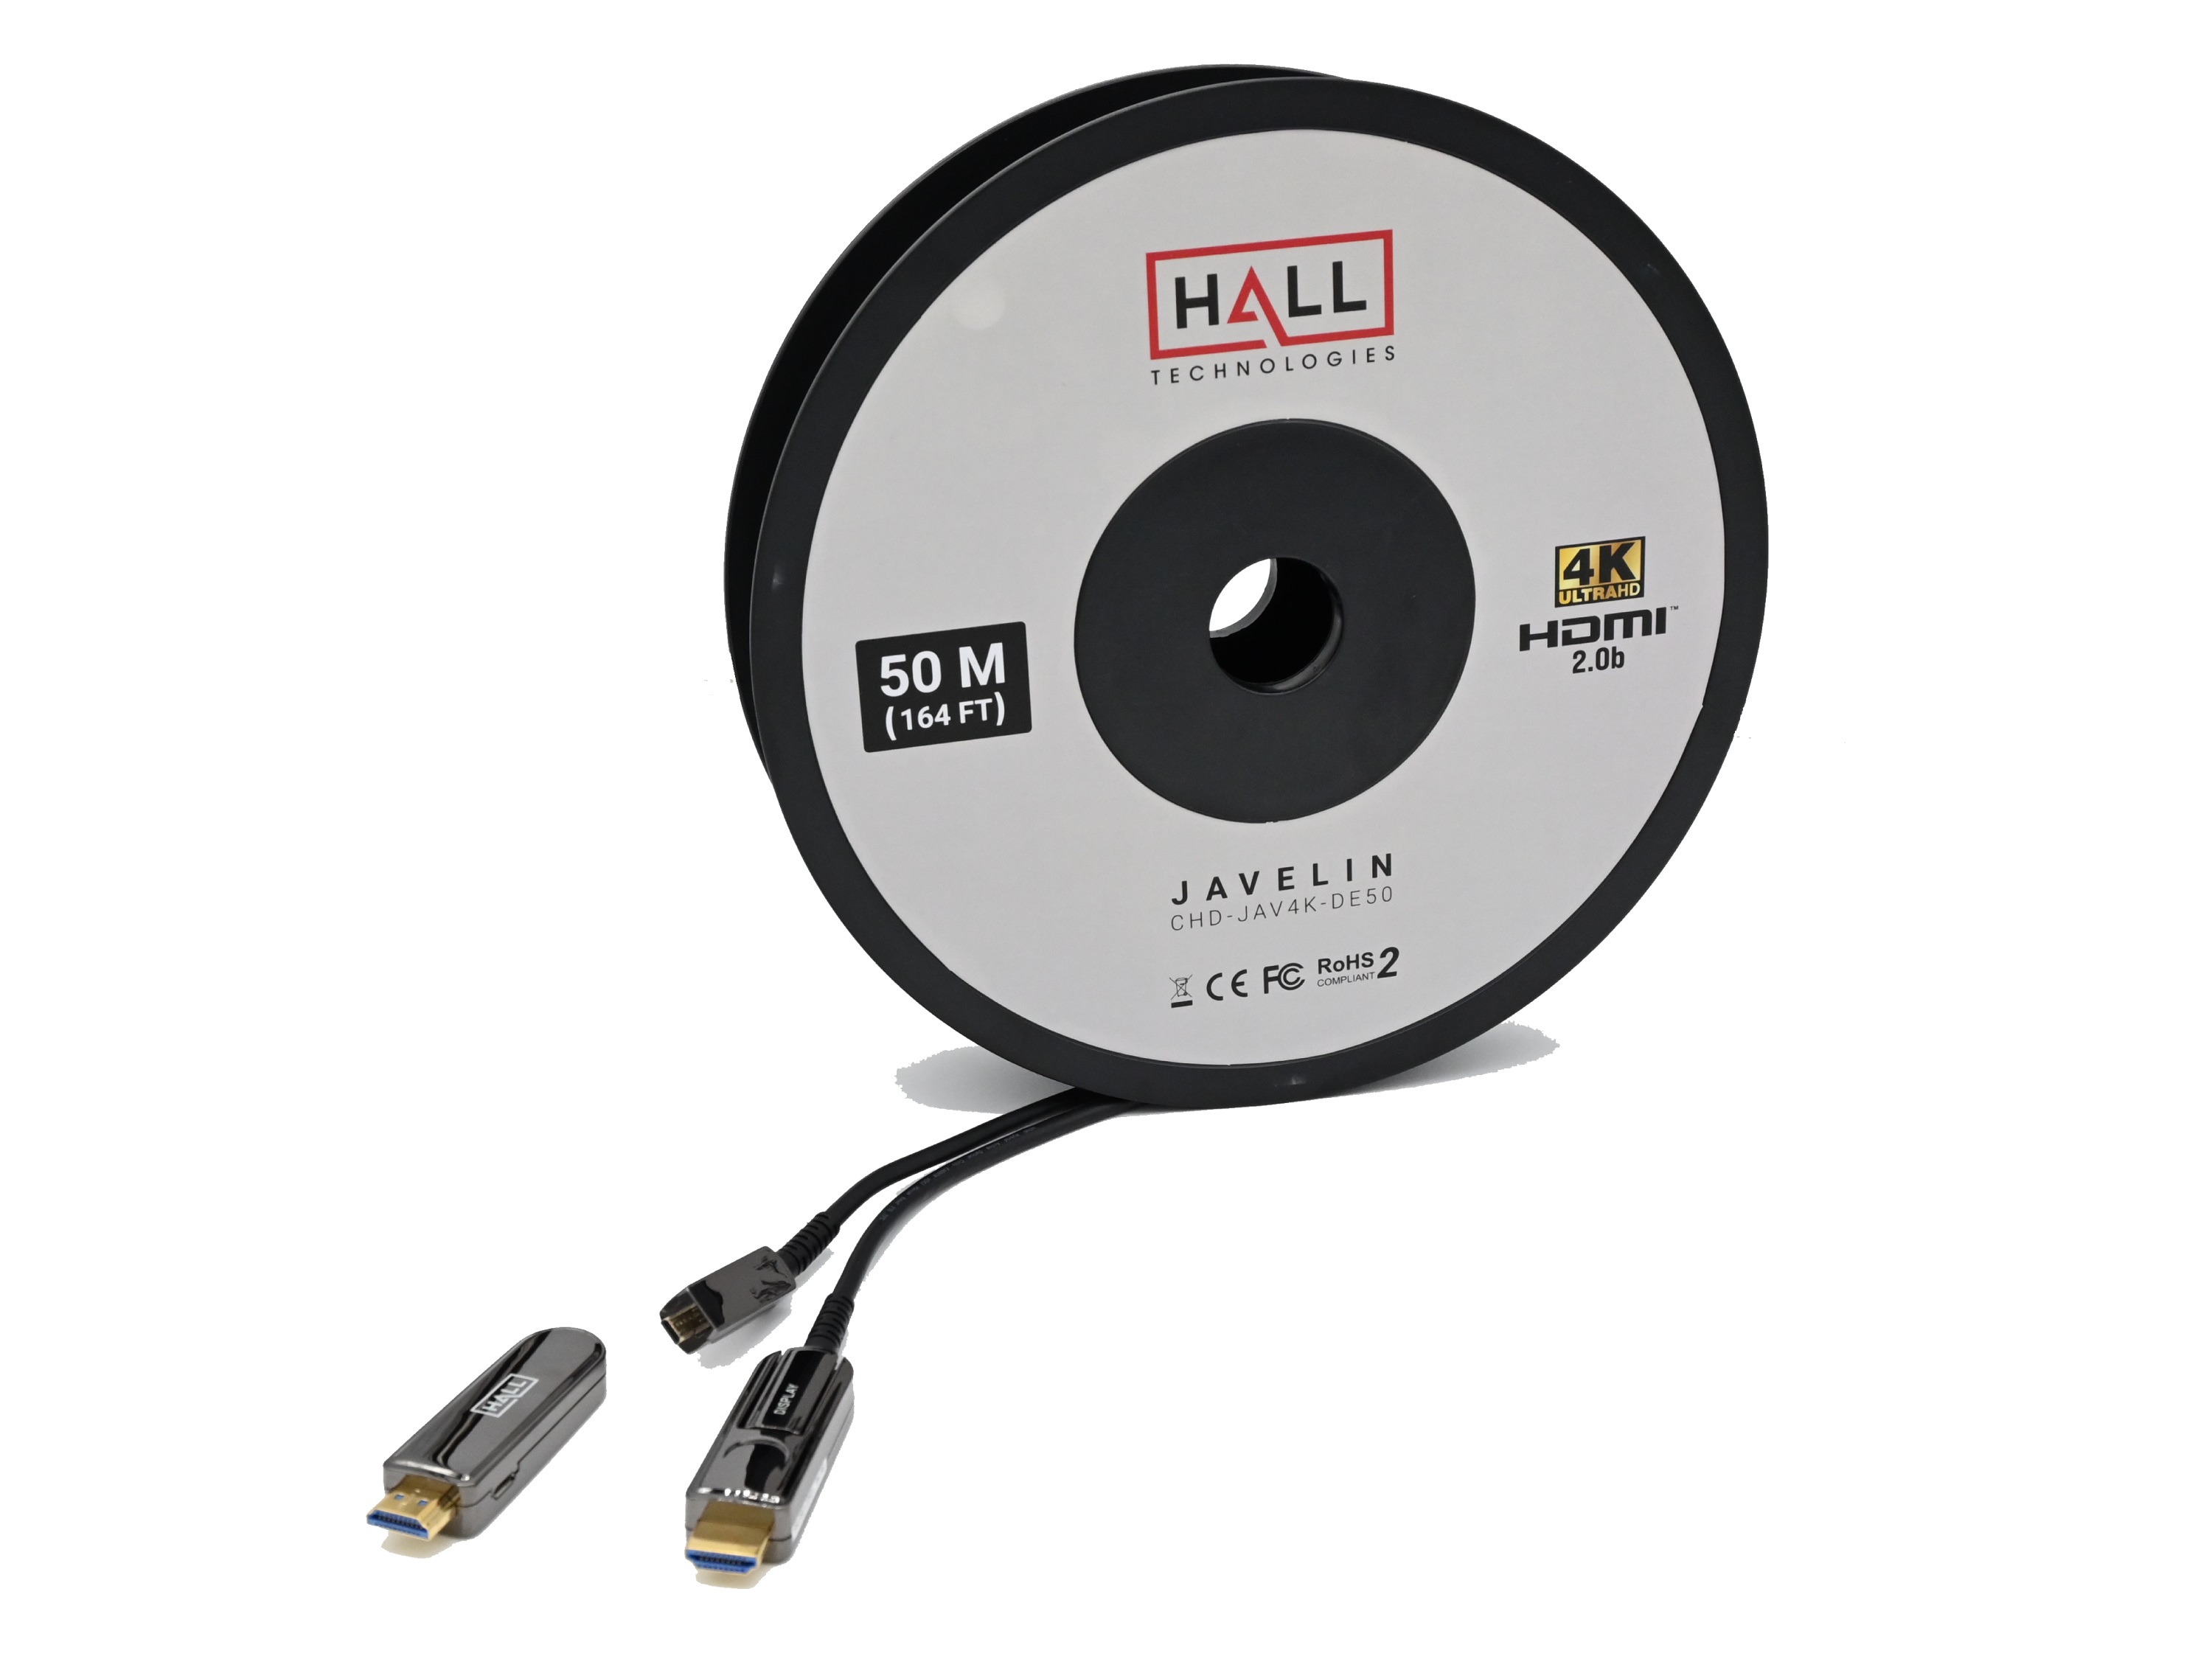 Hall Technologies CHD-JAV4K-DE75 75m/200ft 18 Gbps 4K Javelin Active Plenum HDMI Cable with Detachable Ends